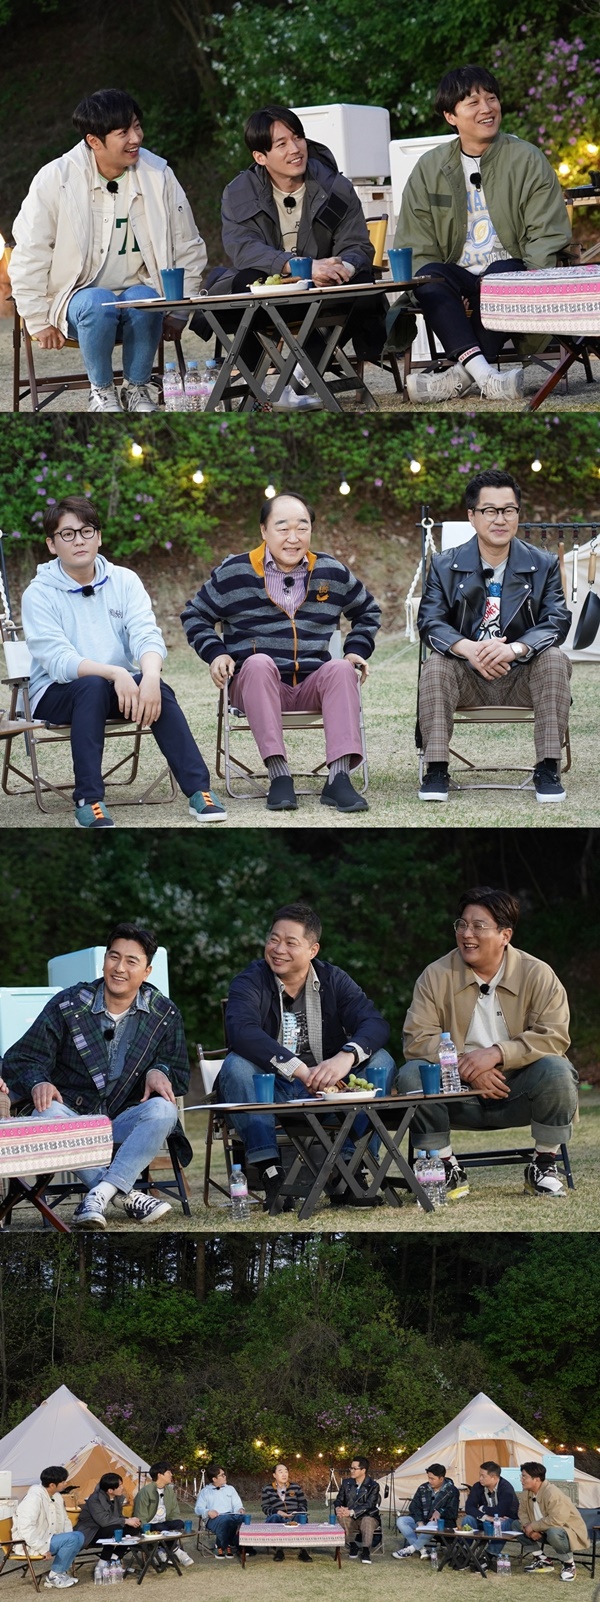 Actor Jang Gwang, Ji Sang-ryeol, and Ganghyeon Kim give a witty gesture and various episodes, and fill the All States Room Cook with laughter and impression.In the 8th MBN entertainment program All States Bangbang Cook (hereinafter referred to as Bangbang Cook), which is broadcasted at 5:50 pm on the 29th, Jang Gwang, Gangheeon Kim and Ji Sang-ryeol will appear as the eighth special guest.The eighth cooking theme is Summer Food to taste in advance, Actor Team Cha Tae-hyun, Jang Hyuk, and Lee Sang-yeop point out the mixed group Koyotae, which is well suited to summer, as a potential special guest candidate.However, breaking everyones expectations, Jang Gwang, Gangheeon Kim and Ji Sang-ryeol appear to raise questions about what connection they have.Especially, Ji Sang-ryeol has a great deal of conversation from the beginning, leading to a pleasant atmosphere of Bangbang Cook.He evaluates the taste of food with a godly adverb, and does not give the audio a break by invoking a torque radar.In addition, Ji Sang-ryeol is expecting more because he reveals why he always went in shorts and shorts at the time of his appearance in Austere Heaven as a newcomer, including comedian Mizawa and Somethings going on between them recently.In addition, Jang Gwang tells the behind-the-scenes story that he heard the premiere after the premiere because of the image caused by the character in the movie Crucible and I will kill you when I meet.In addition, Ganghyeon Kim is a back door that recalls what happened with a person during his new year of dreaming in Daehangno and tears and gives everyone a good feeling.The episode of Talk vending machine Ji Sang-ryeols tireless gesture and the laughter and impression of Jang Gwang and Gangheeon Kim, who have now become the actors of the Republic of Korea, can be seen in the 8th episode of Bangbang Cook broadcasted at 5:50 pm on the 29th.